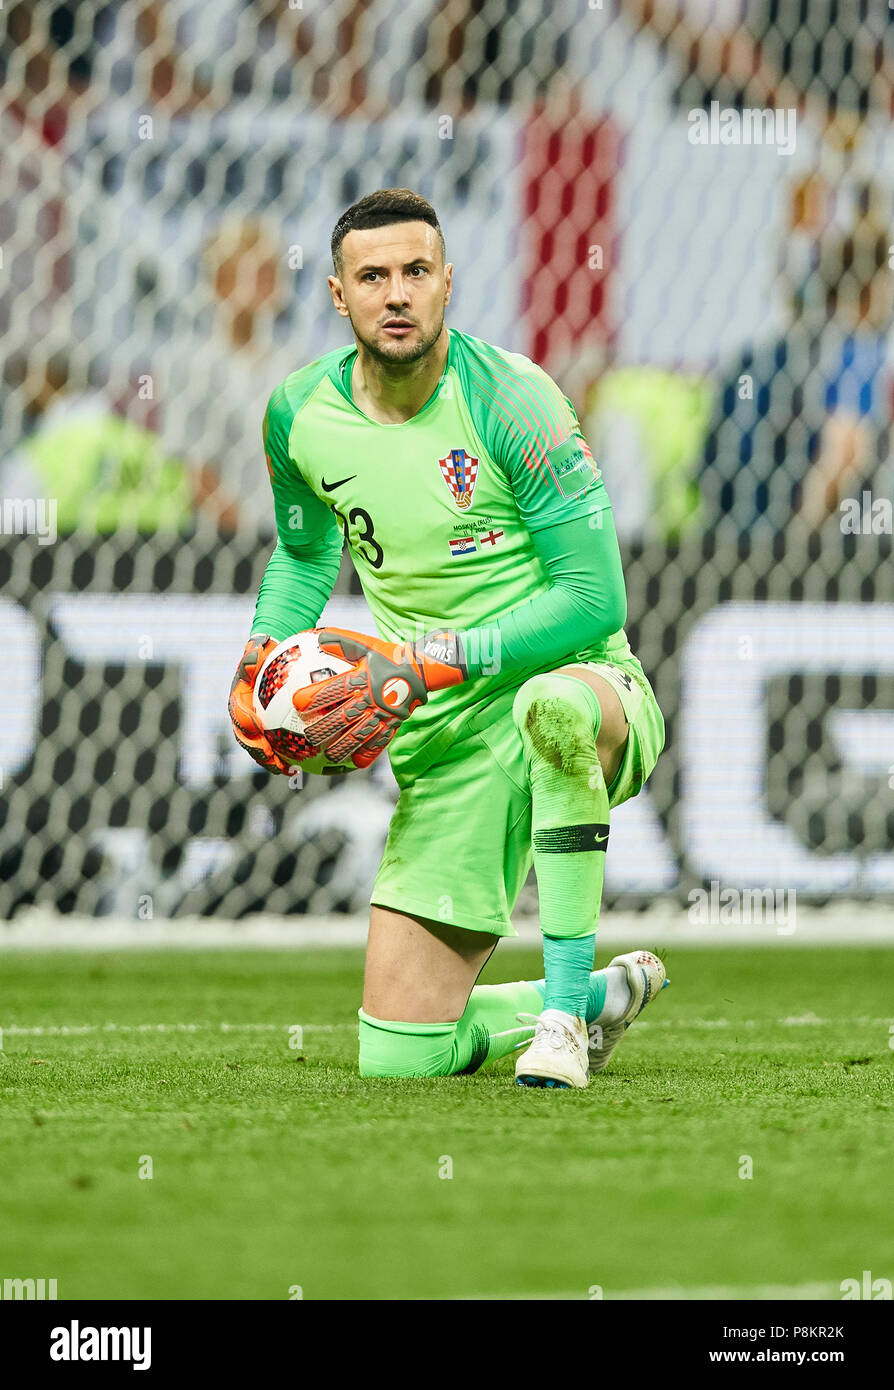 England - Croatia, Soccer, Moscow, July 11, 2018 Daniel SUBASIC, Croatia Nr.23  drives, controls the ball, action, full-size, Single action with ball, full body, whole figure, cutout, single shots, ball treatment, pick-up, header, cut out,  ENGLAND  - CROATIA 1-2 Football FIFA WORLD CUP 2018 RUSSIA, Semifinal, Season 2018/2019,  July 11, 2018 in Moscow, Russia. © Peter Schatz / Alamy Live News Stock Photo